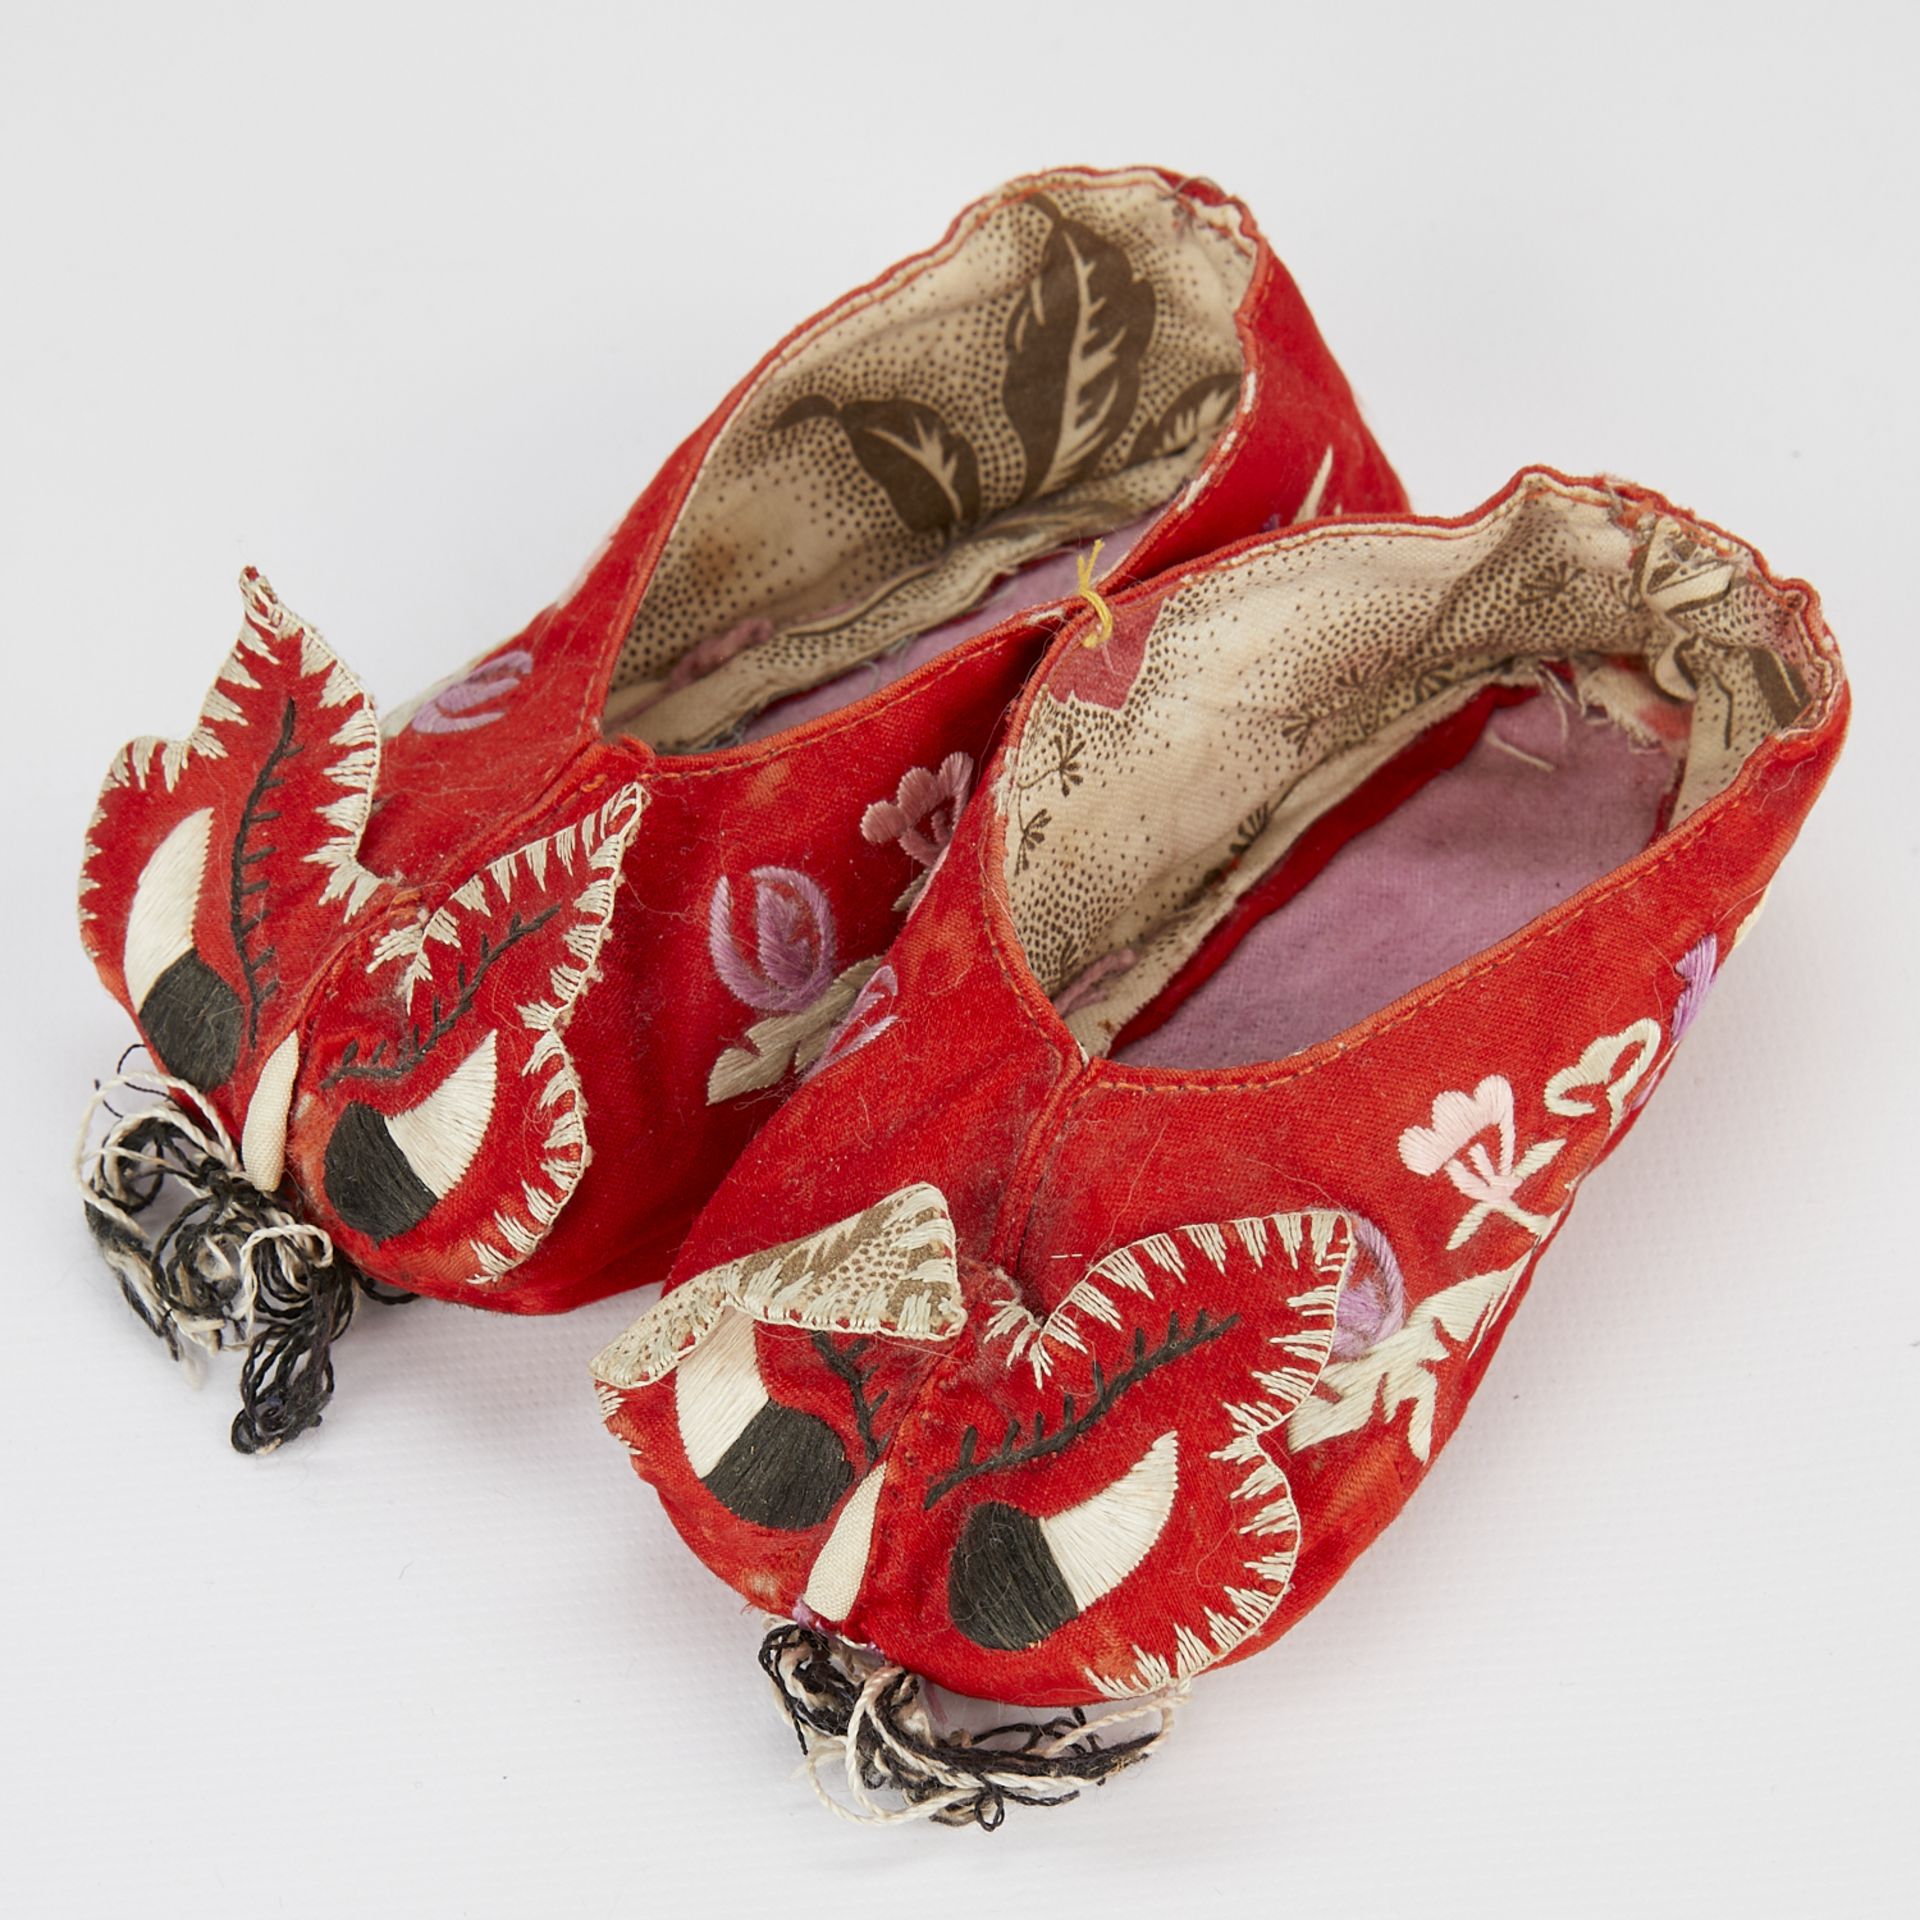 6 Pairs of Chinese Silk Foot Binding Shoes - Image 7 of 12